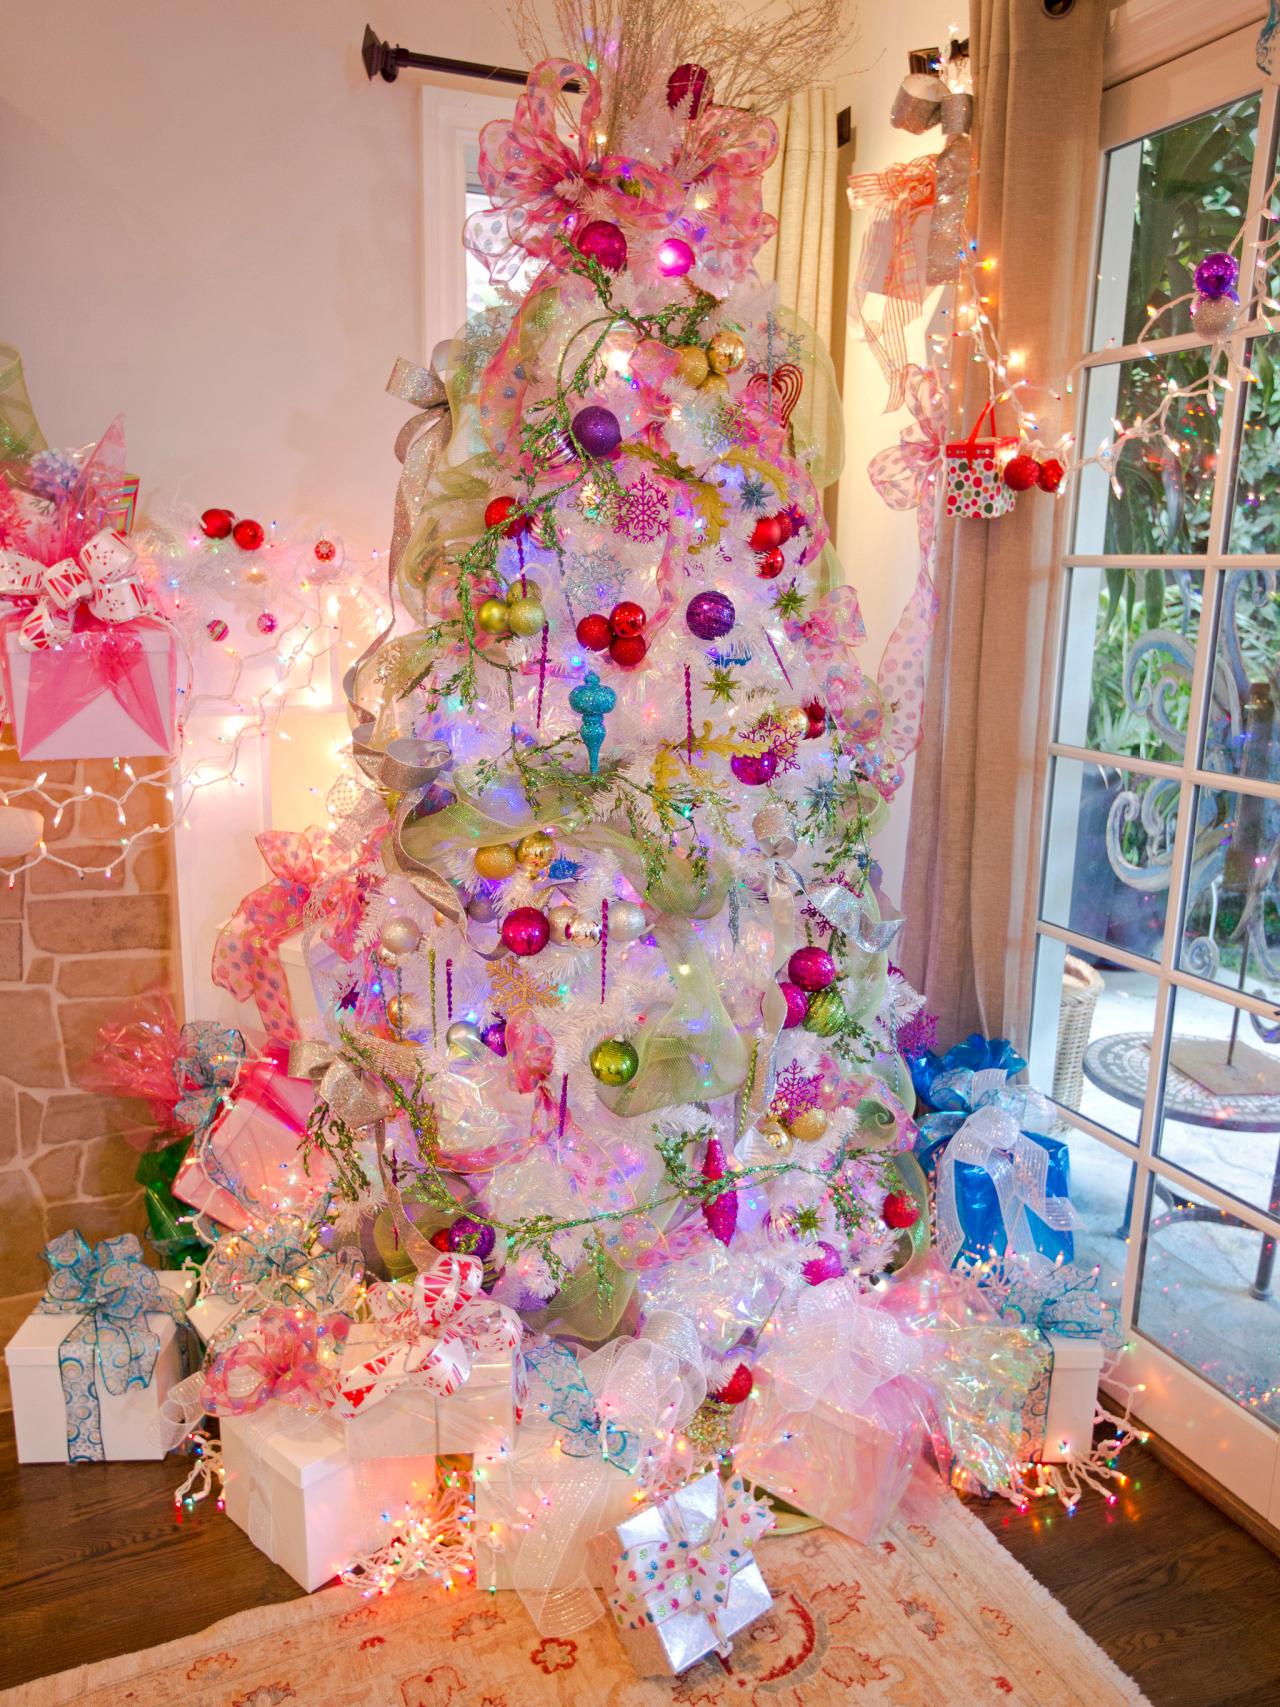 45 Colorful Christmas Tree Decorations Ideas - Decoration Love